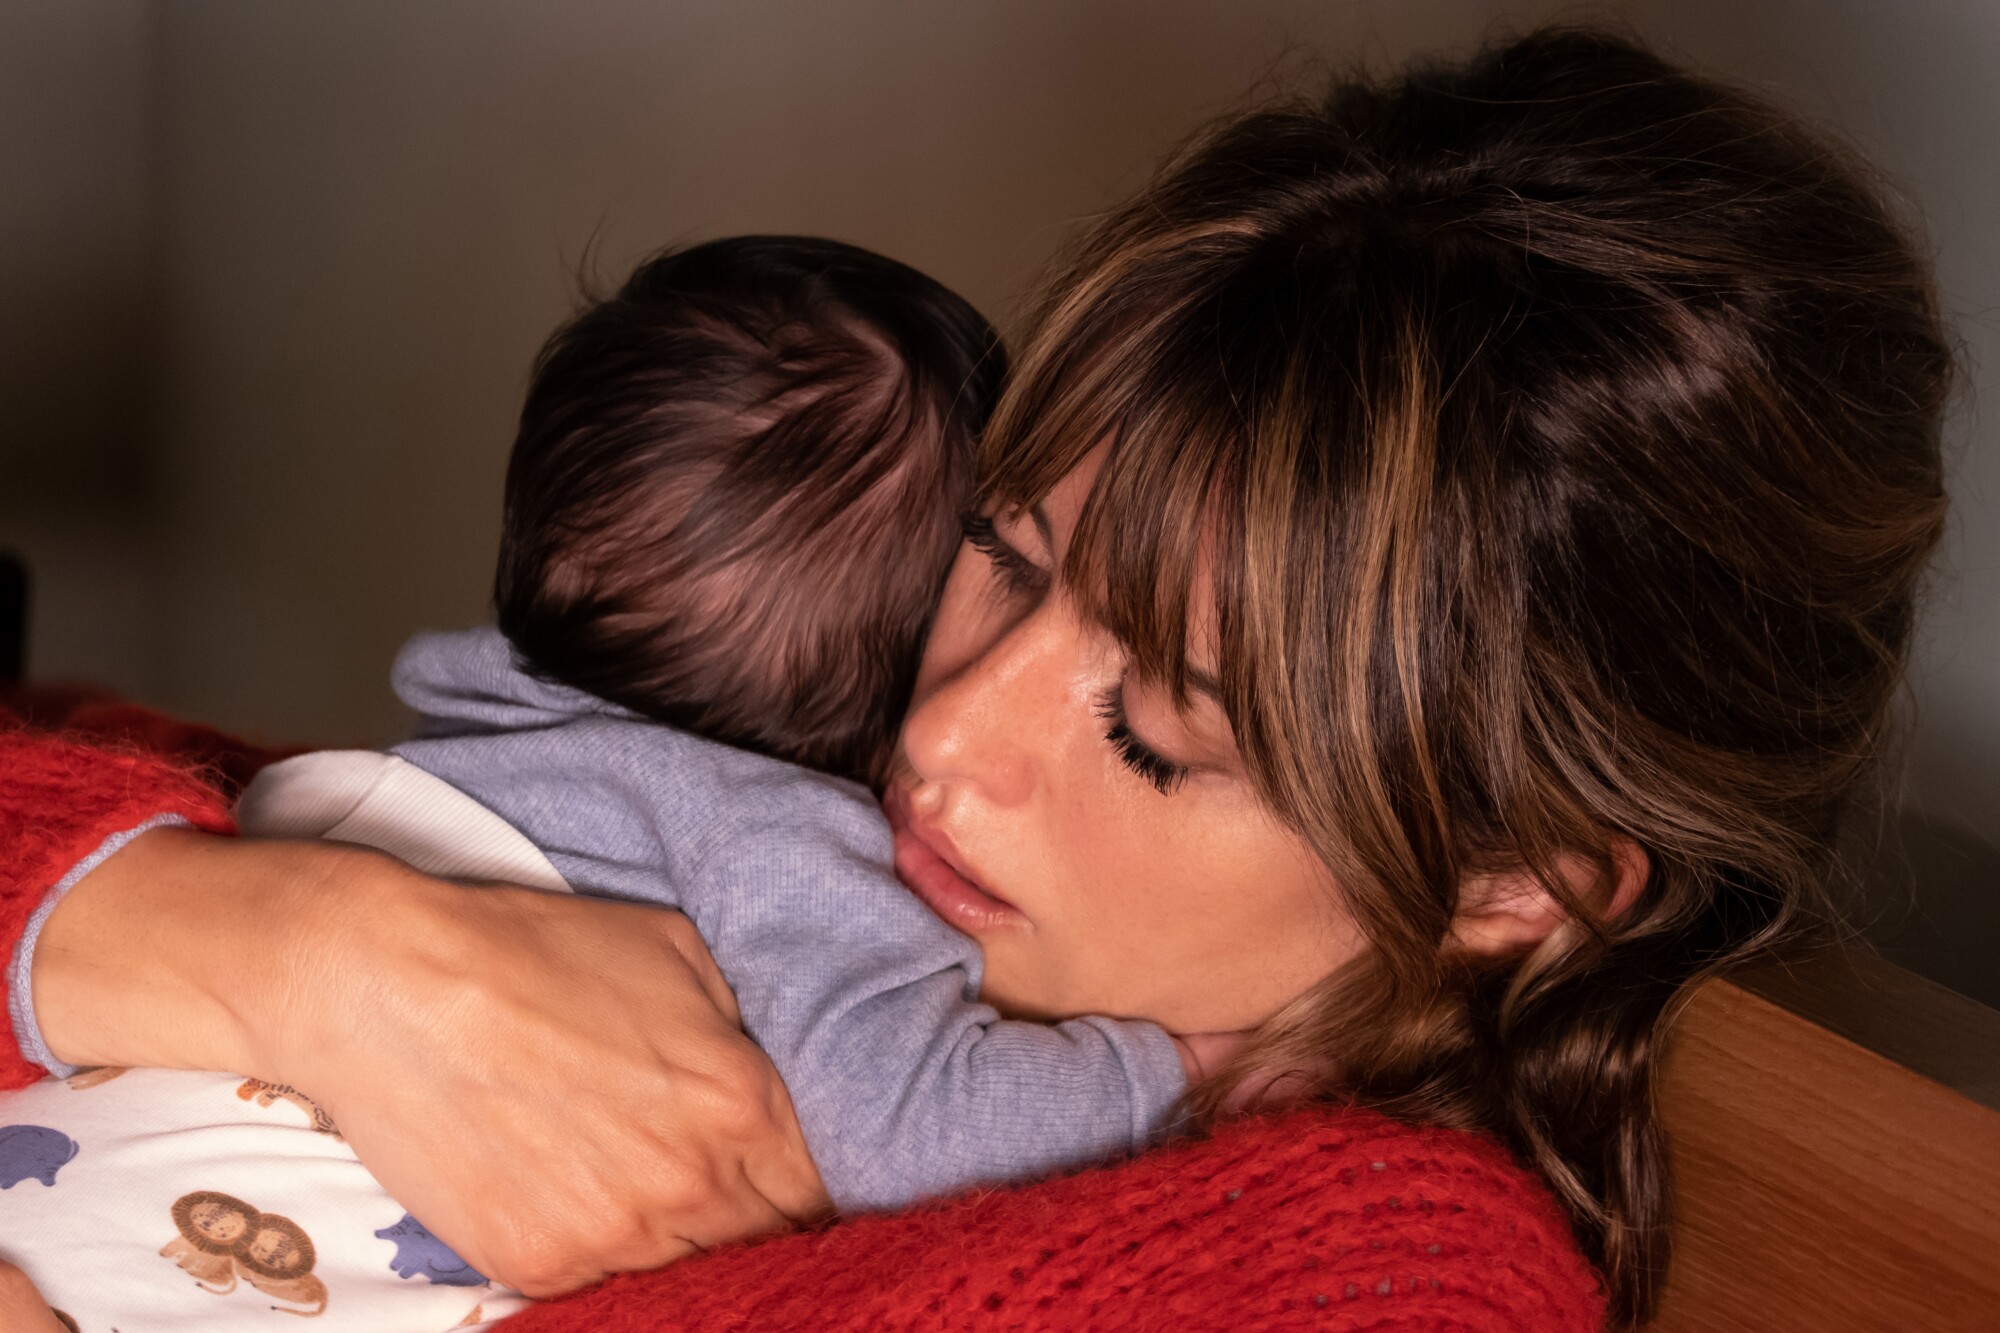 Penélope Cruz holds a baby in “Parallel Mothers.”